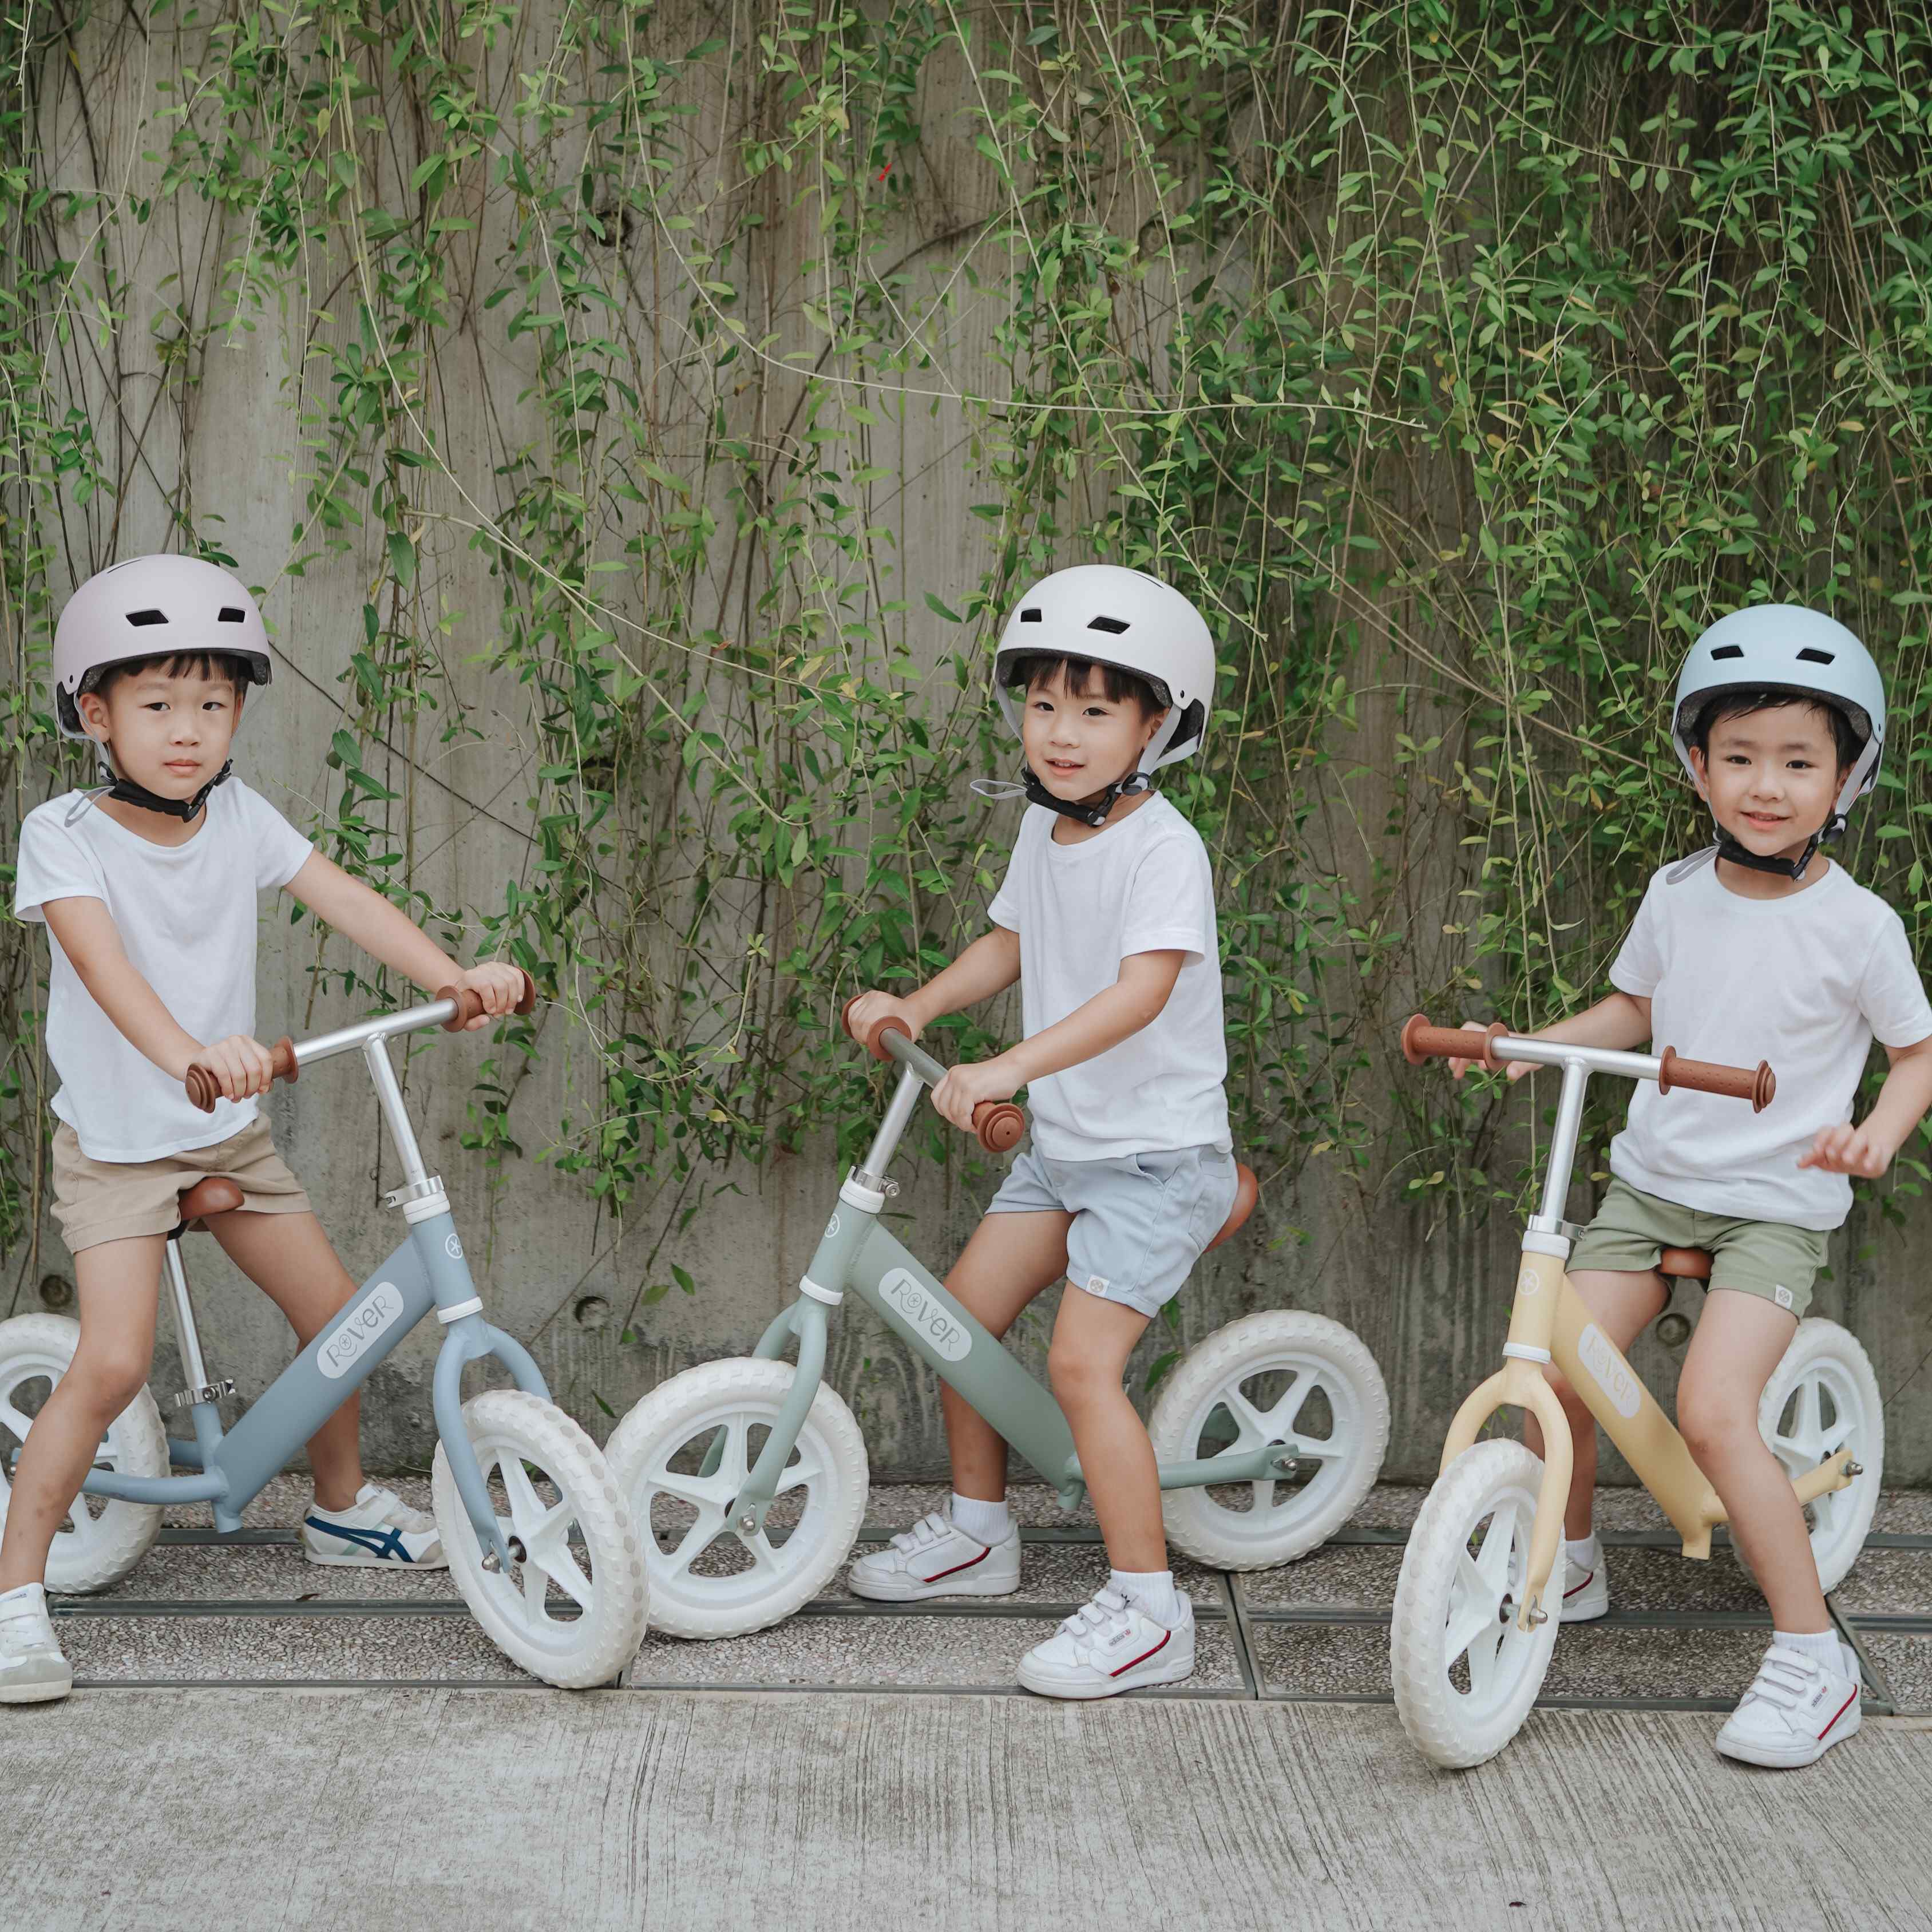 Honey Rover Bikes Balance Bike + Helmet (Available in assorted Sizes & Colours)